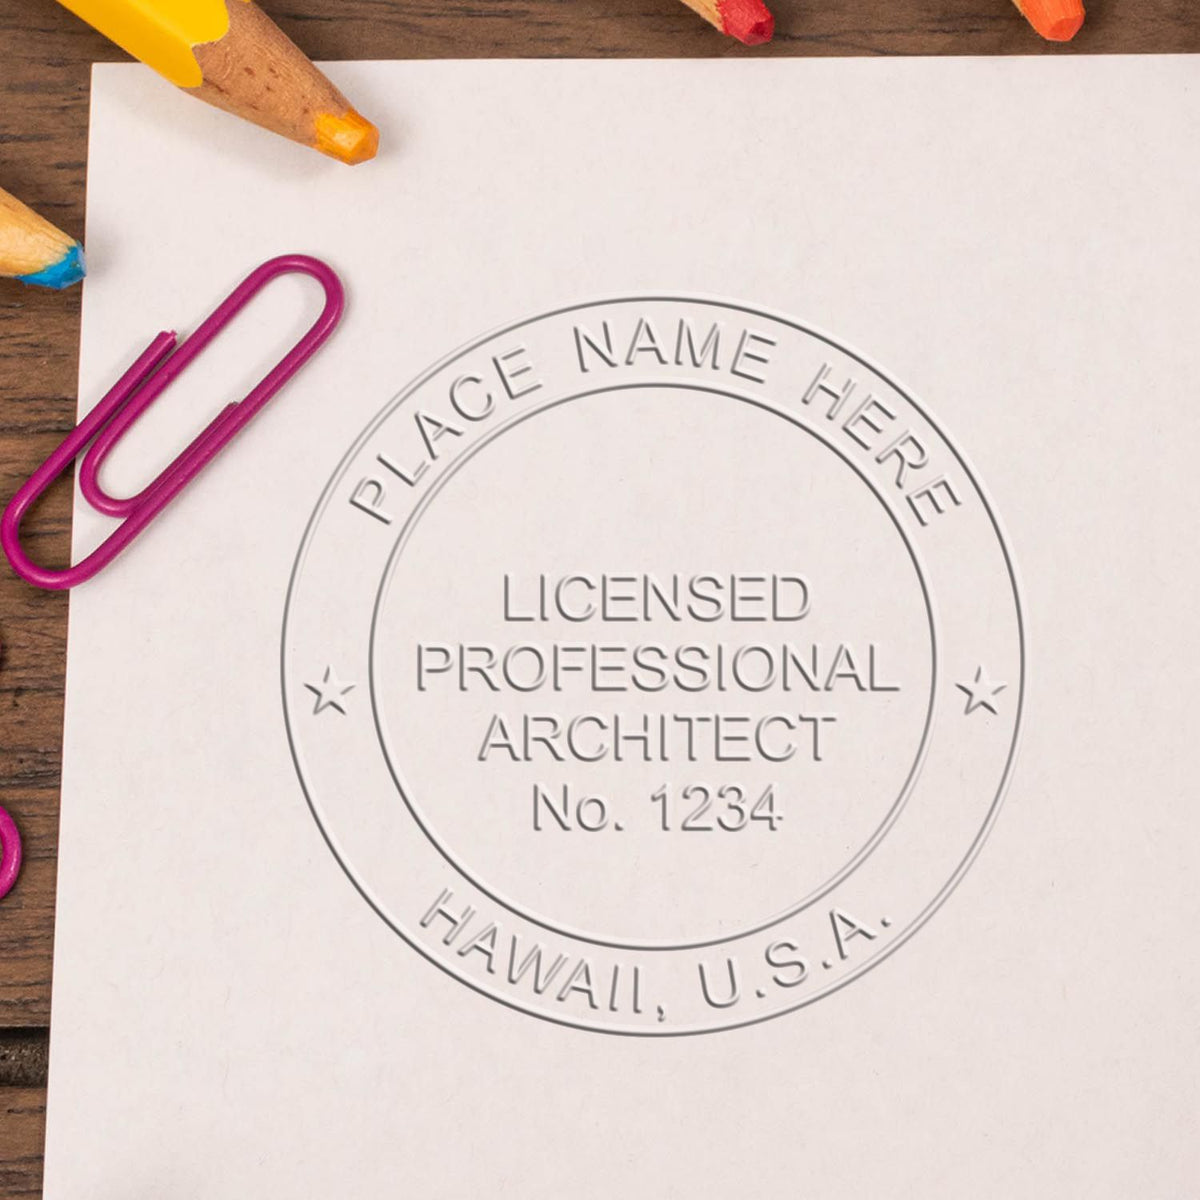 The State of Hawaii Architectural Seal Embosser stamp impression comes to life with a crisp, detailed photo on paper - showcasing true professional quality.